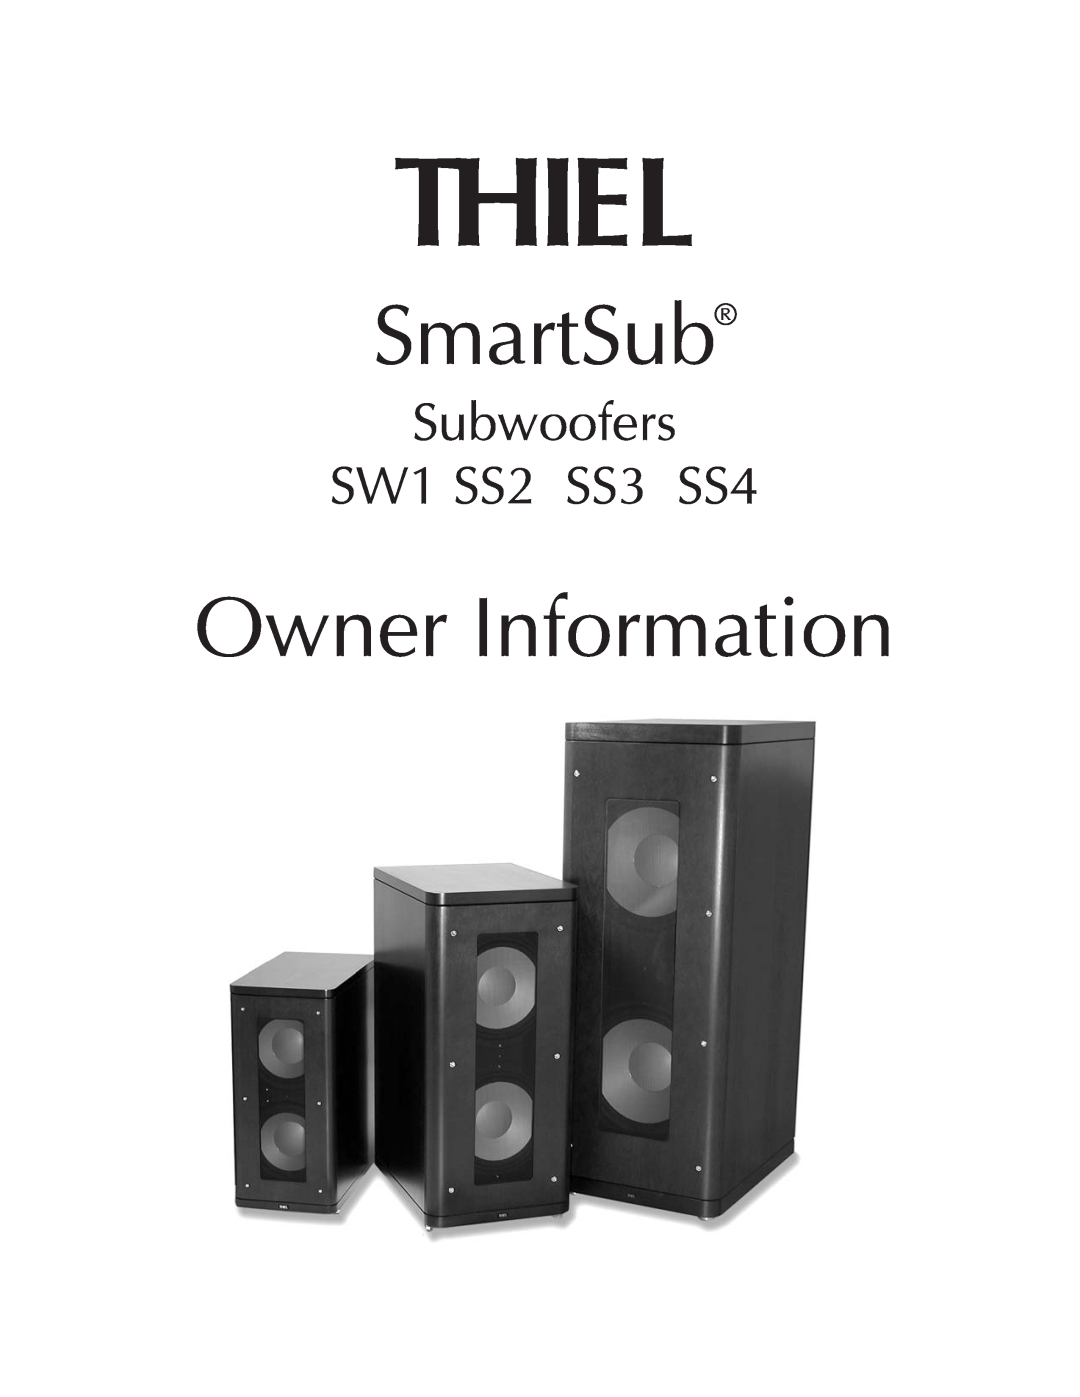 Thiel Audio Products manual Thiel, SmartSub, Owner Information, Subwoofers SW1 SS2 SS3 SS4 